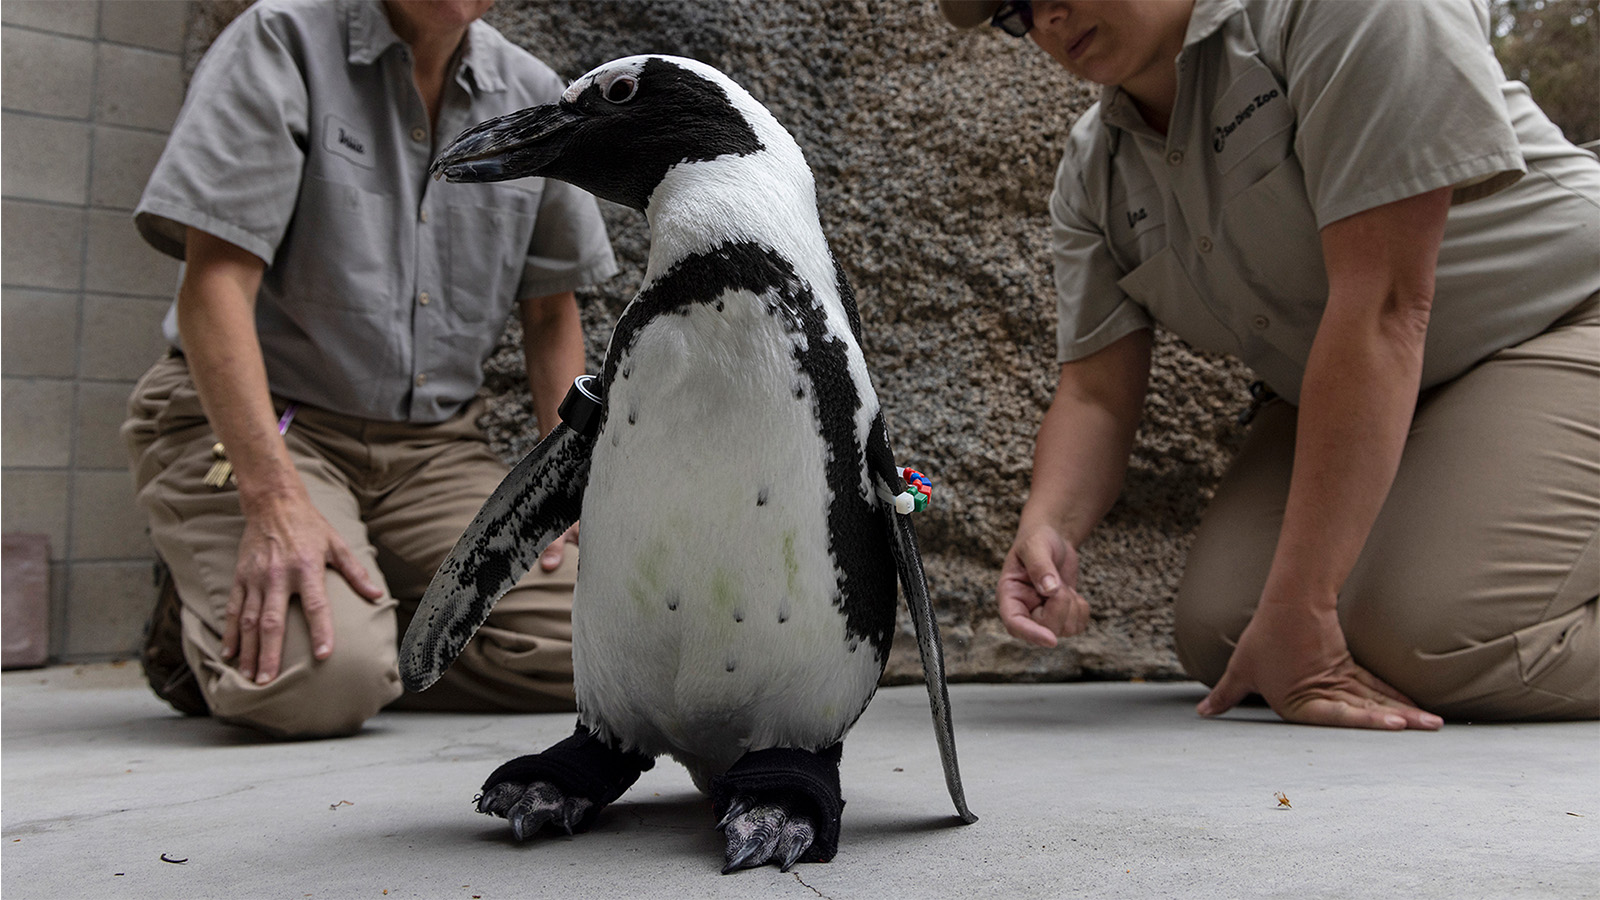 Birch Aquarium Moves 5 Little Blue Penguins From San Diego to